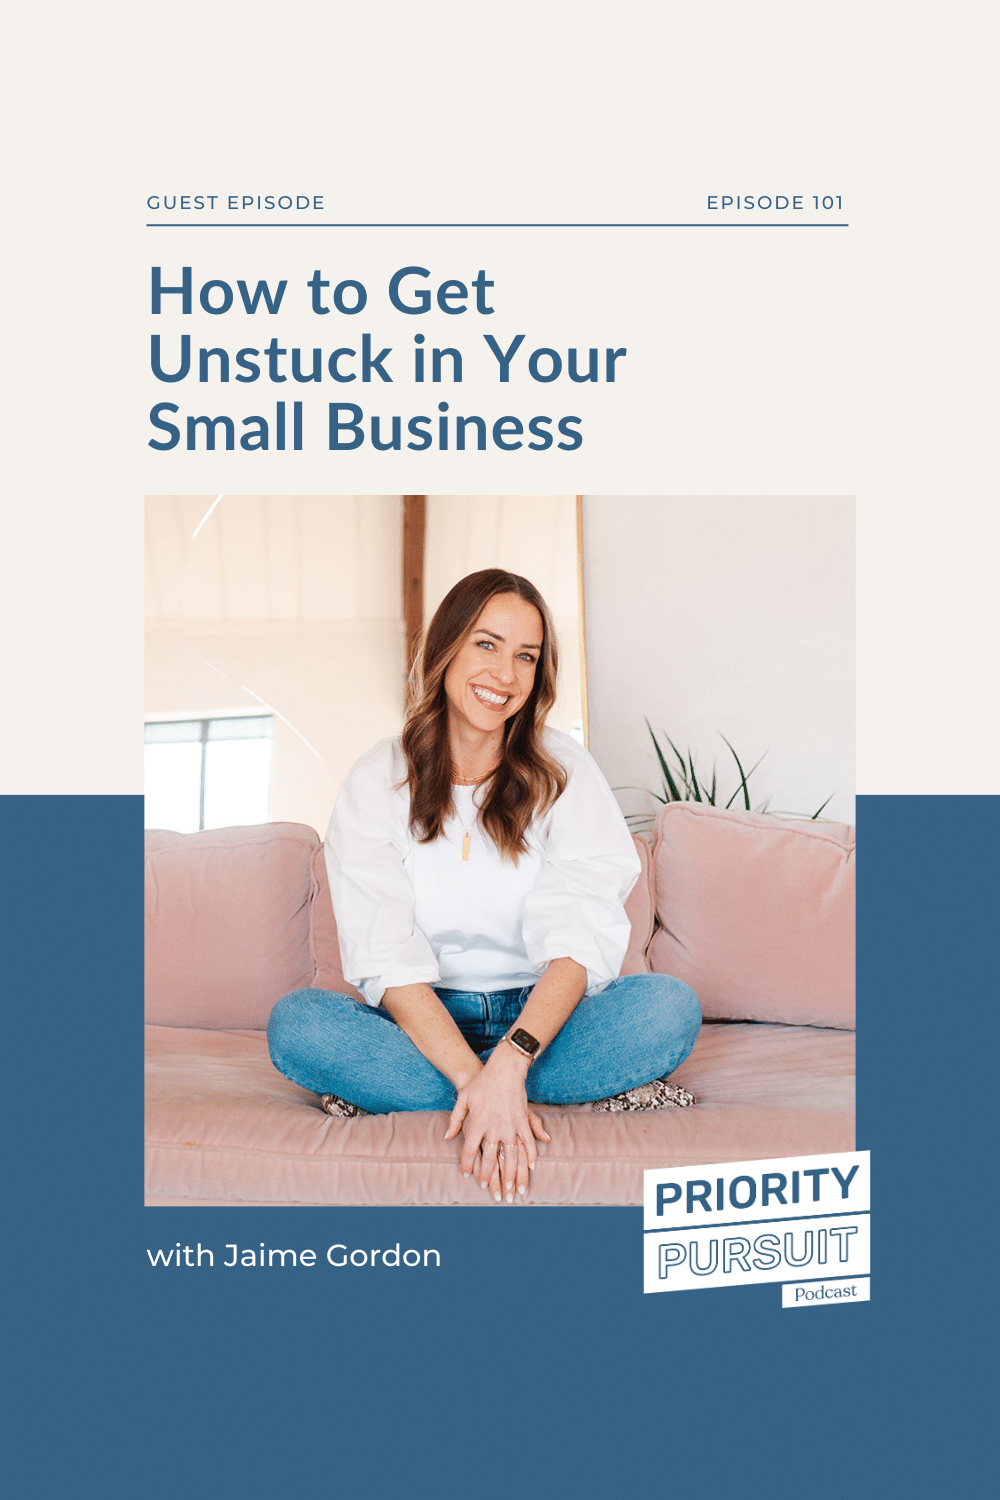 How to Get Unstuck in Your Small Business with Jaime Gordon on Priority Pursuit